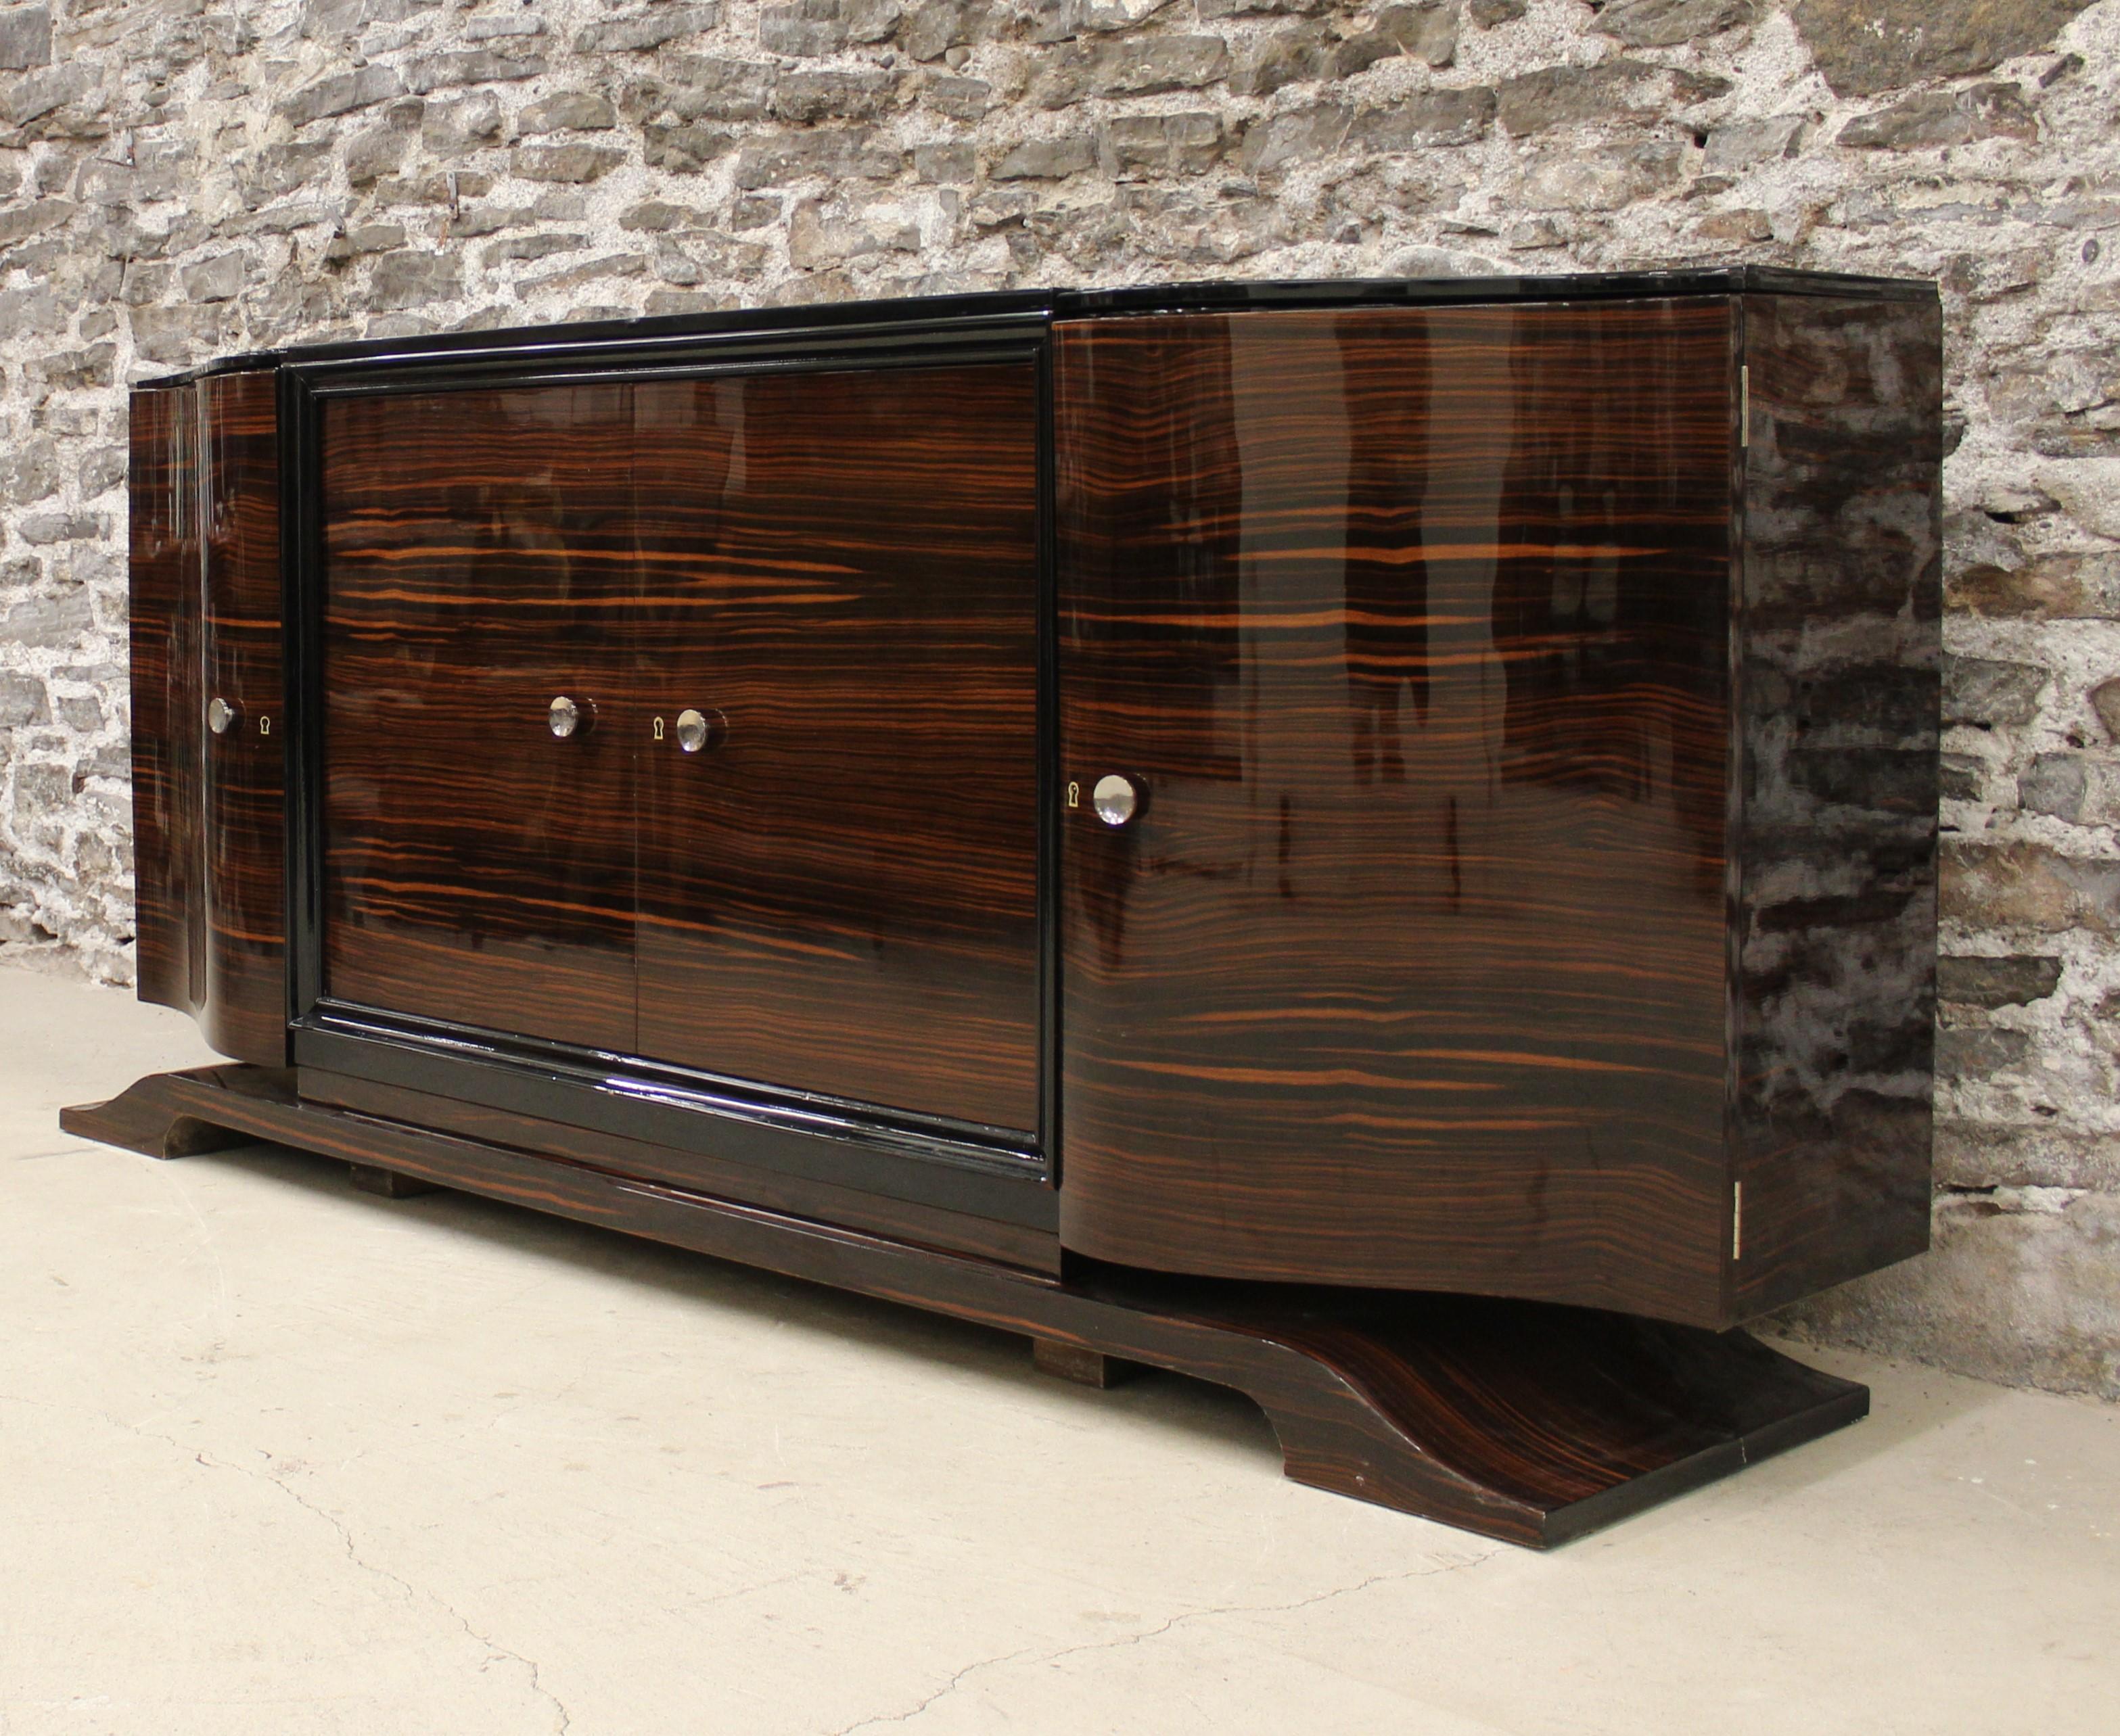 French Art Deco Macassar Ebony Credenza in the Manner of Émile-Jacques Ruhlmann